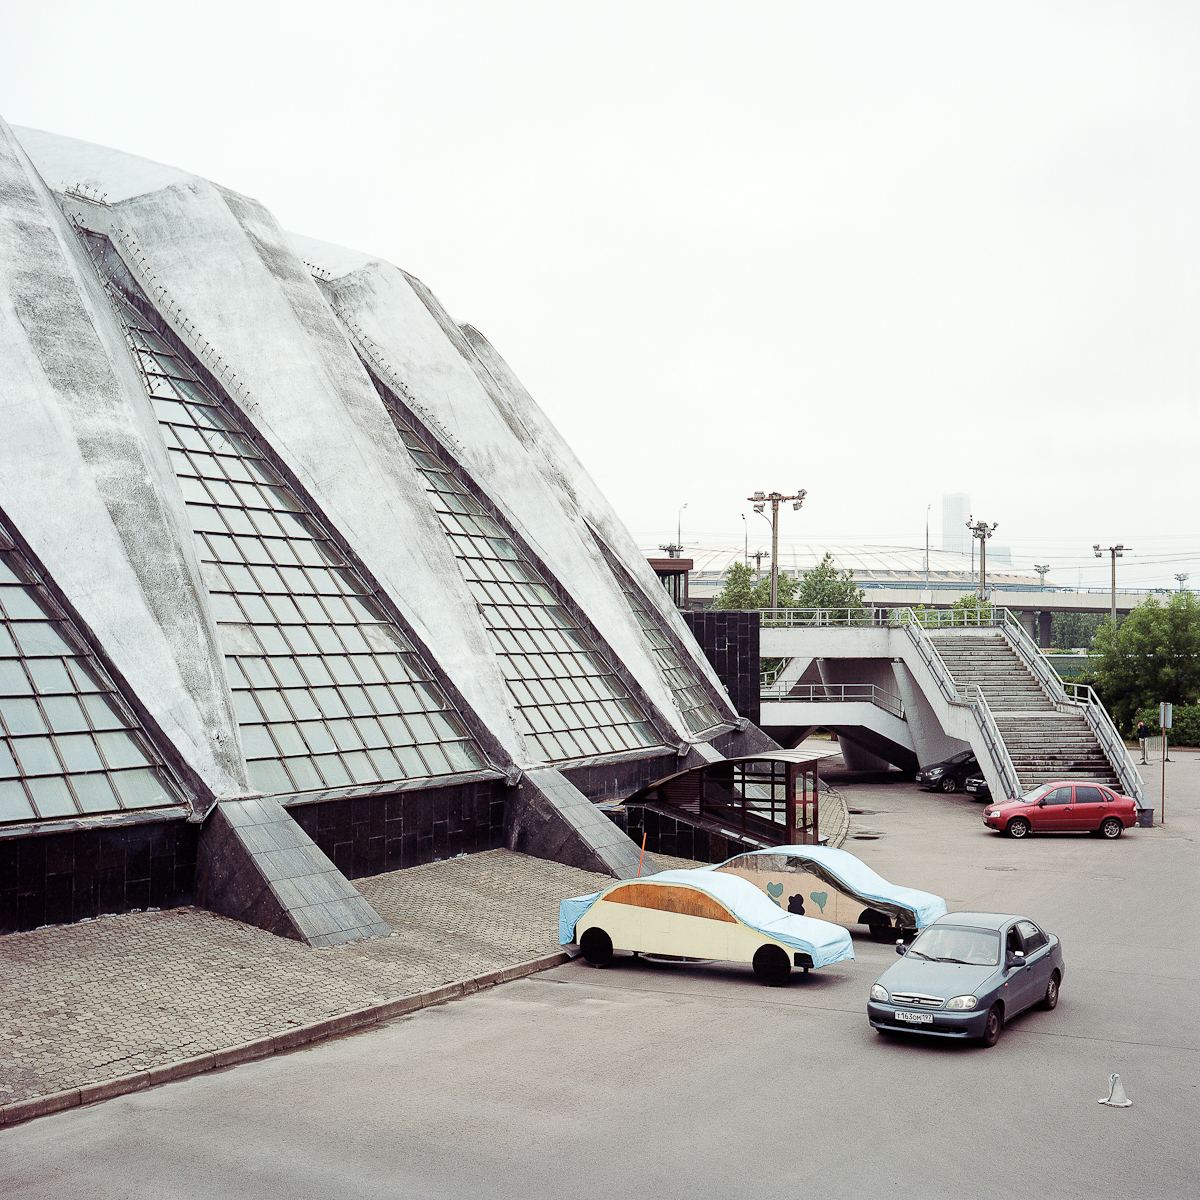 The Olympic Venues Of The USSR, 35 Years Later